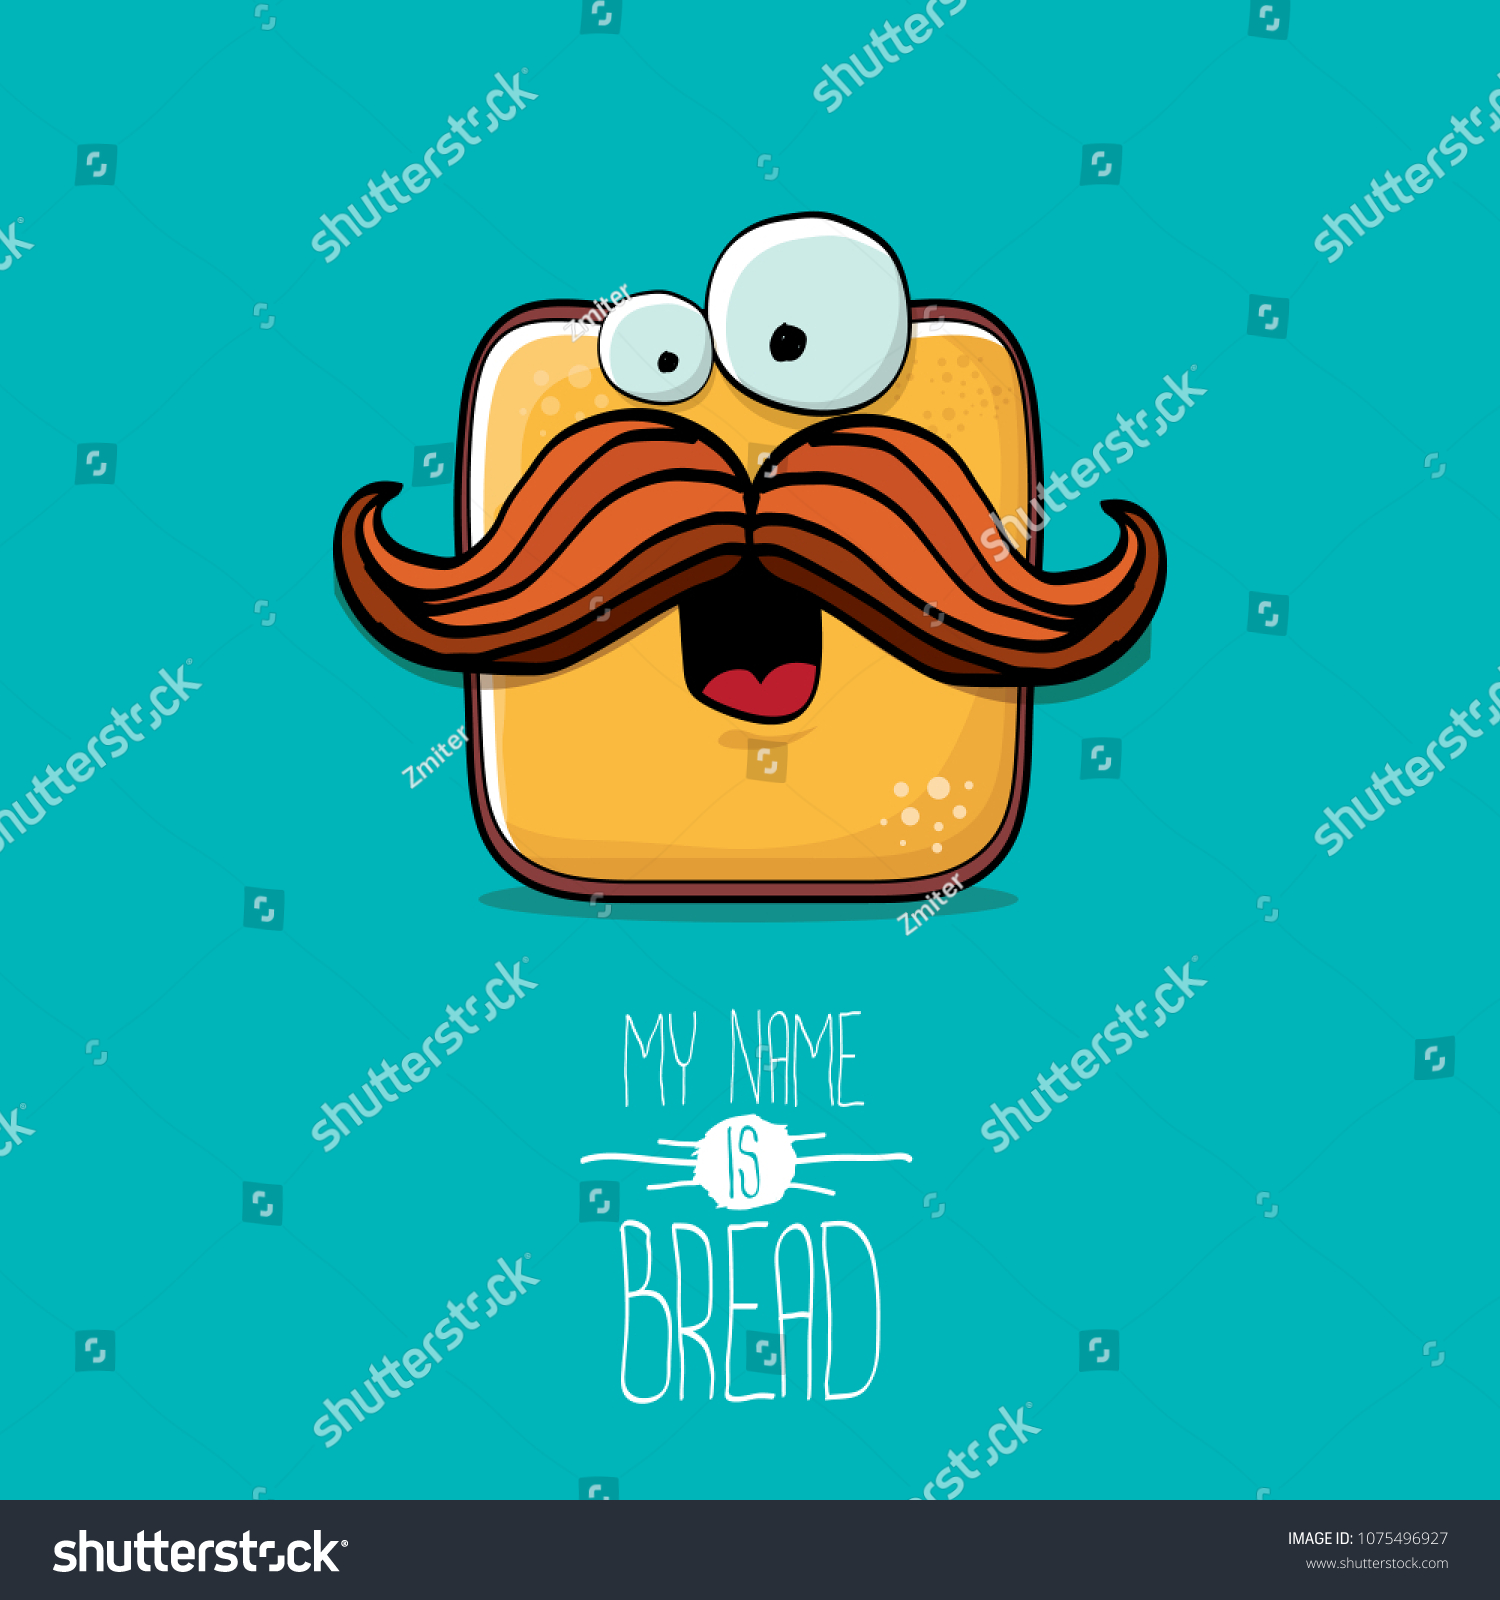 SVG of vector funky cartoon cute sliced bread character isolated on turquoise background. My name is bread concept illustration. funky food character with eyes and mouth or bakery label mascot svg